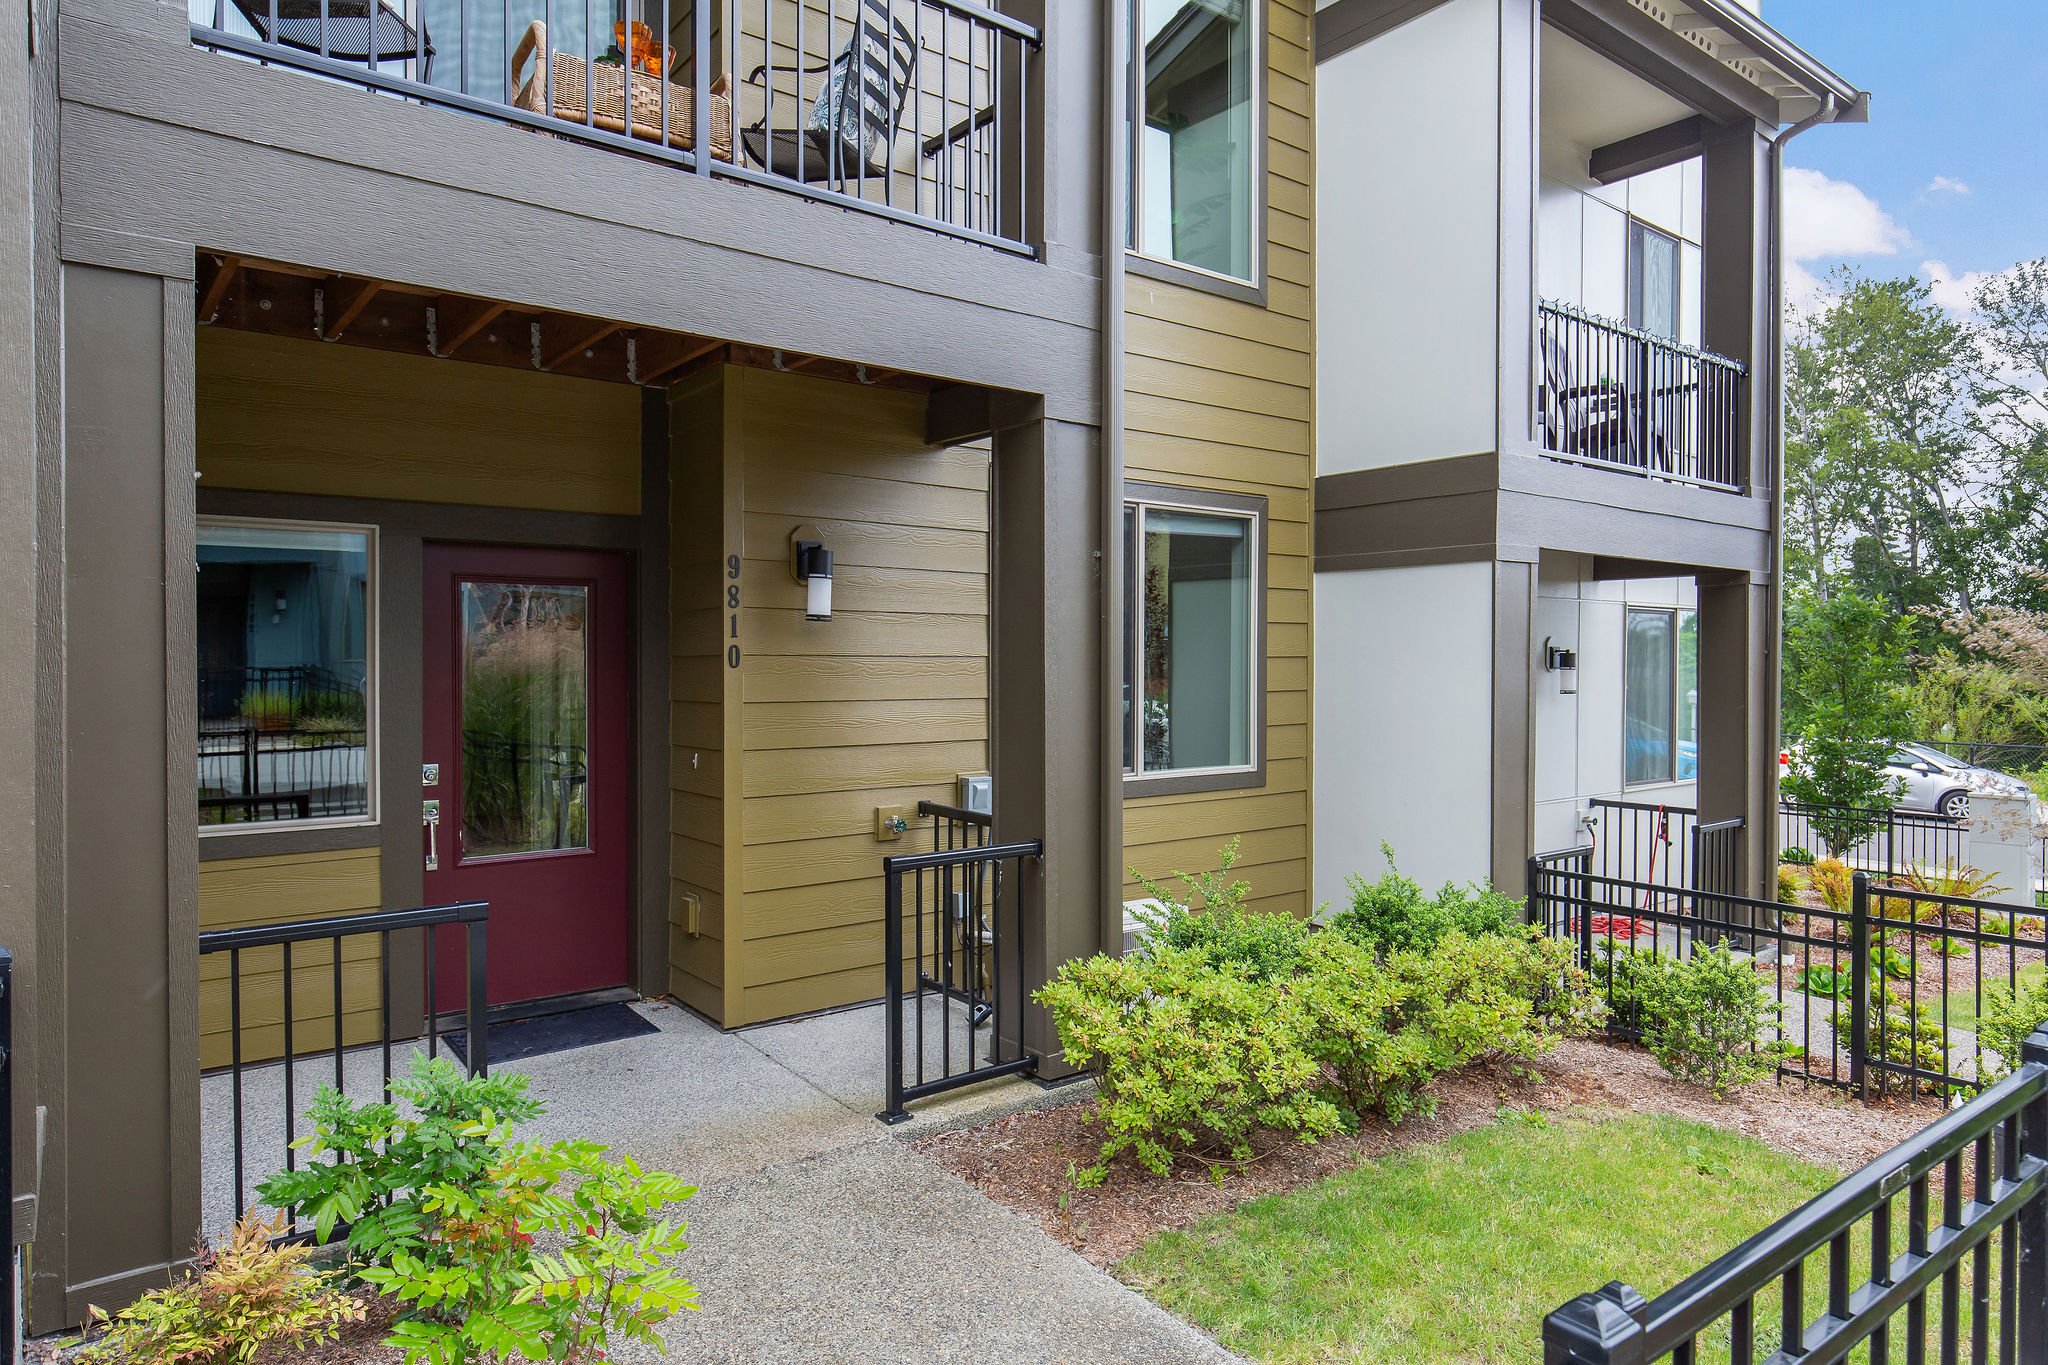  image description: exterior of townhouse with balcony and fence 